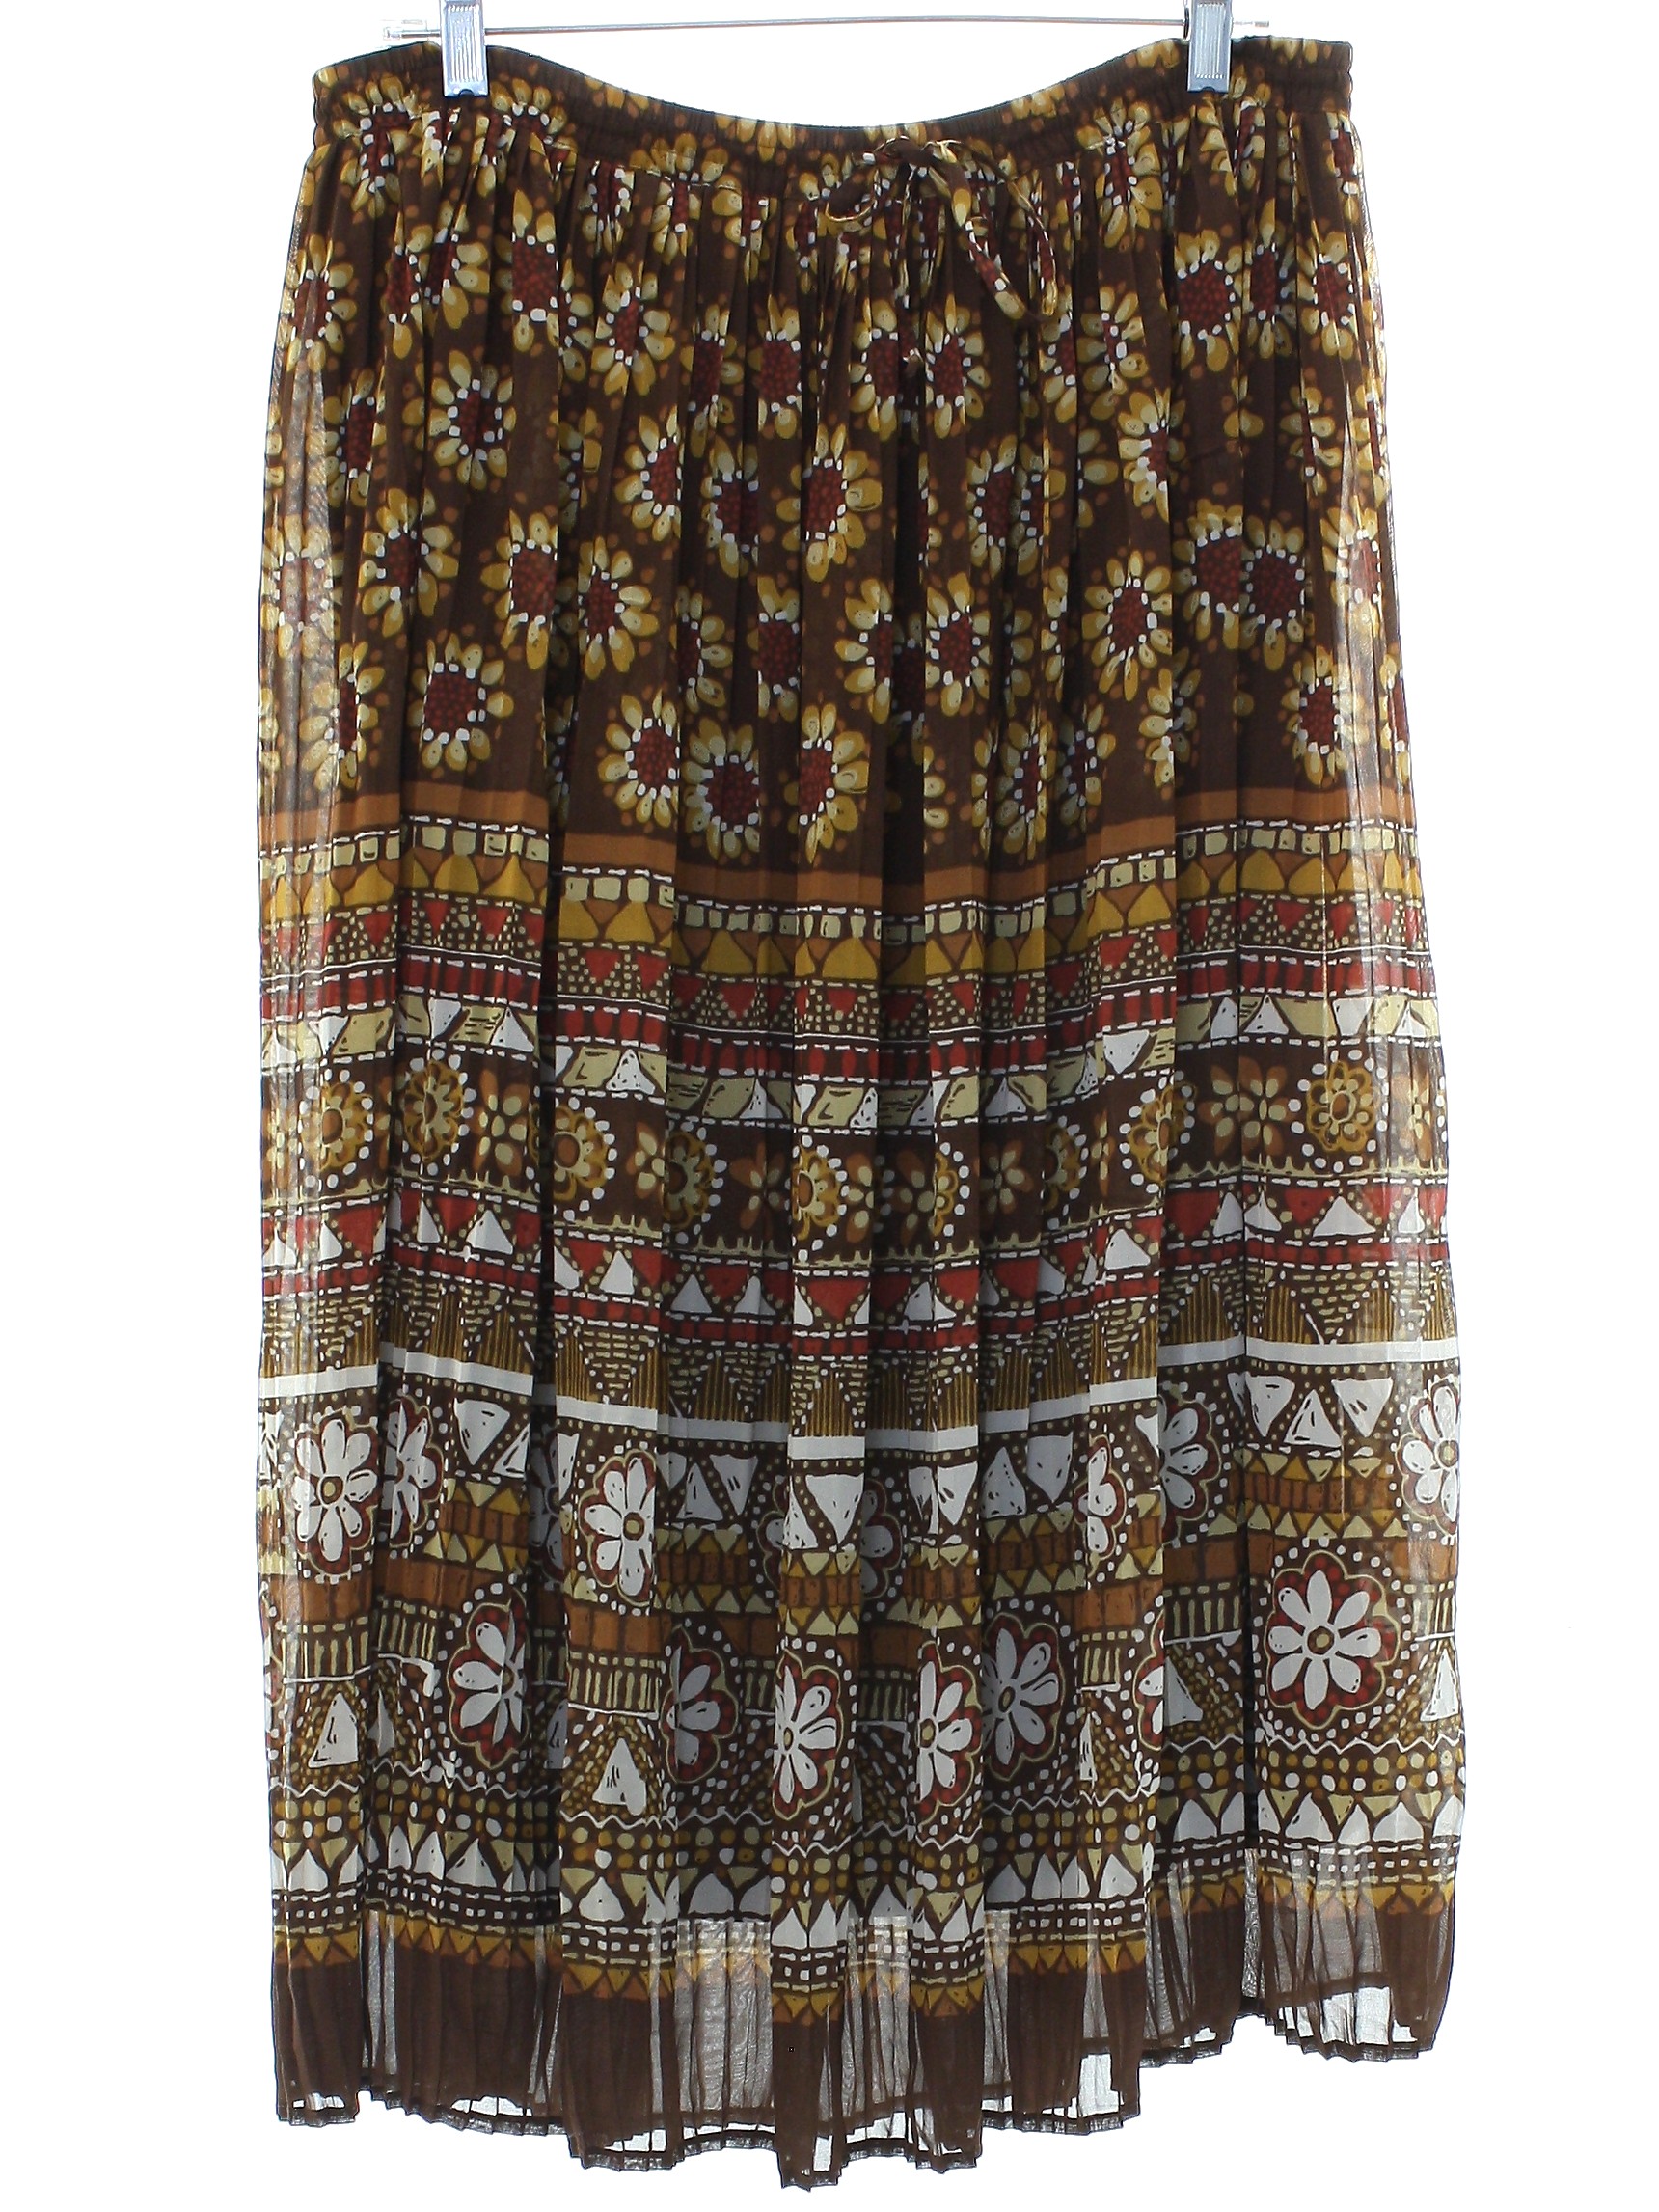 Hippie Skirt: 90s -Alfred Dunner Petite- Womens brown background silky  polyester broomstick style hippie skirt. Busy horizontal stripes and prints  in shades of tan, cream, white and rust, elastic gathered waist with